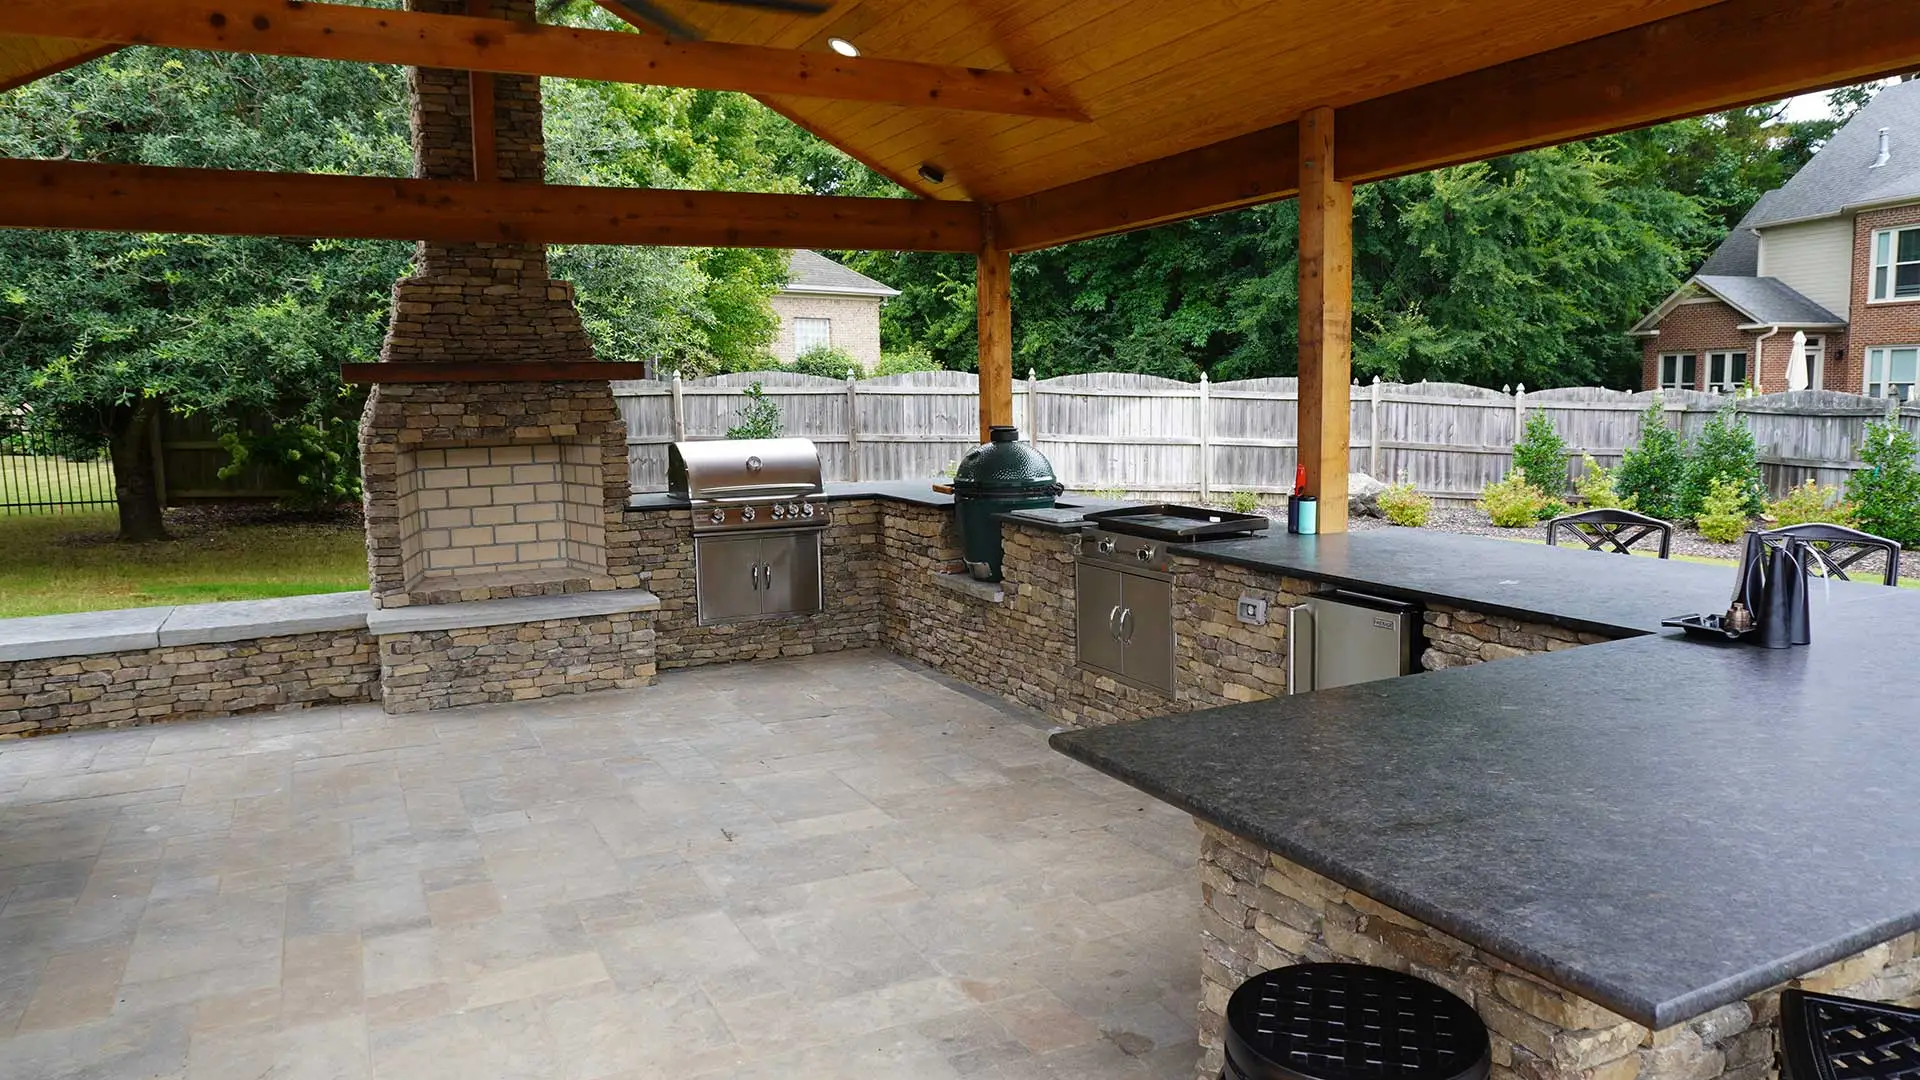 Transformed Backyard in Huntsville, AL With a Fire Pit, Outdoor Kitchen & More